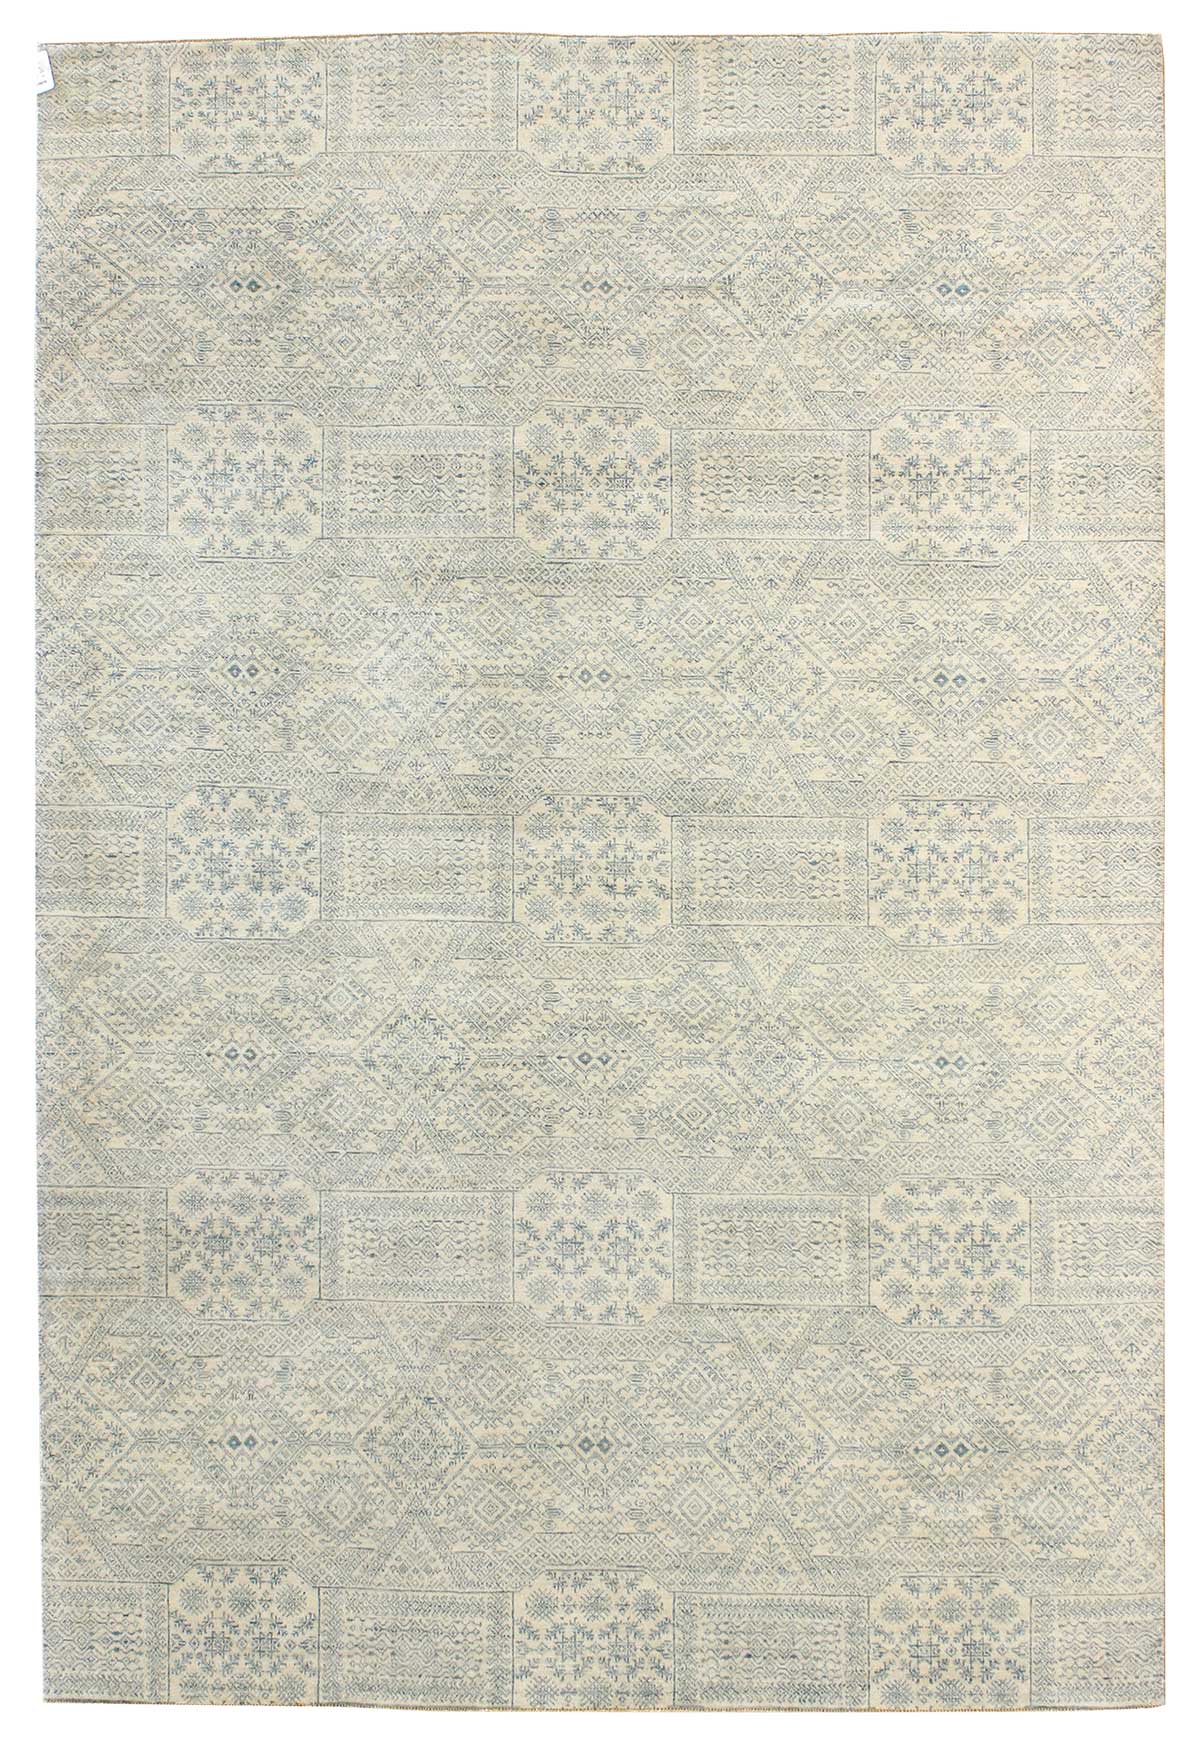 Age Handwoven Transitional Rug